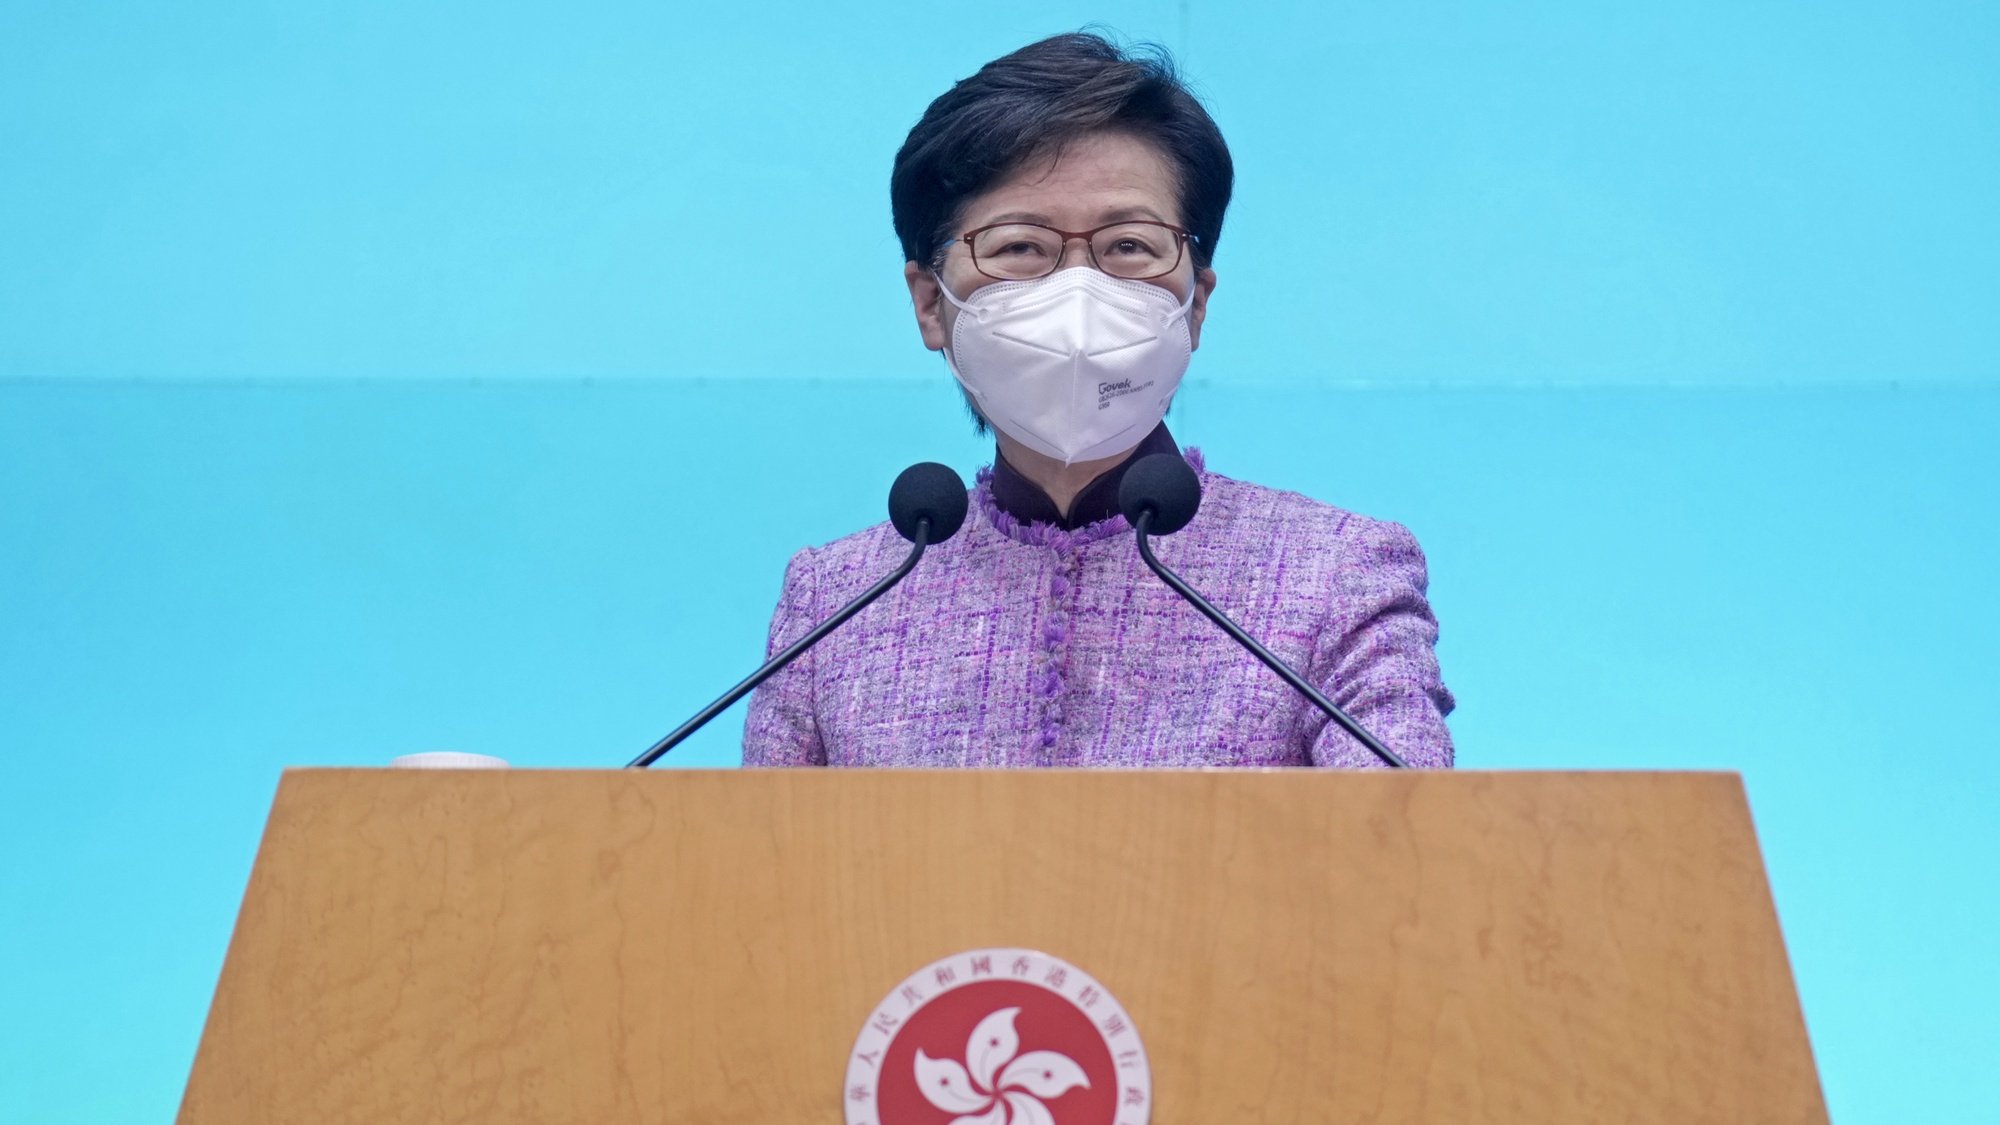 epa09869576 Hong Kong Chief Executive Carrie Lam listens to reporter&#039;s questions during a news conference in Hong Kong, China, 04 April 2022. Hong Kong leader Carrie Lam, who survived massive protests against her government in 2019 and oversaw the implementation of a tough national security law that quashed dissent, said Monday she will not seek a second term. Her successor will be picked in May.  EPA/Vincent Yu / POOL